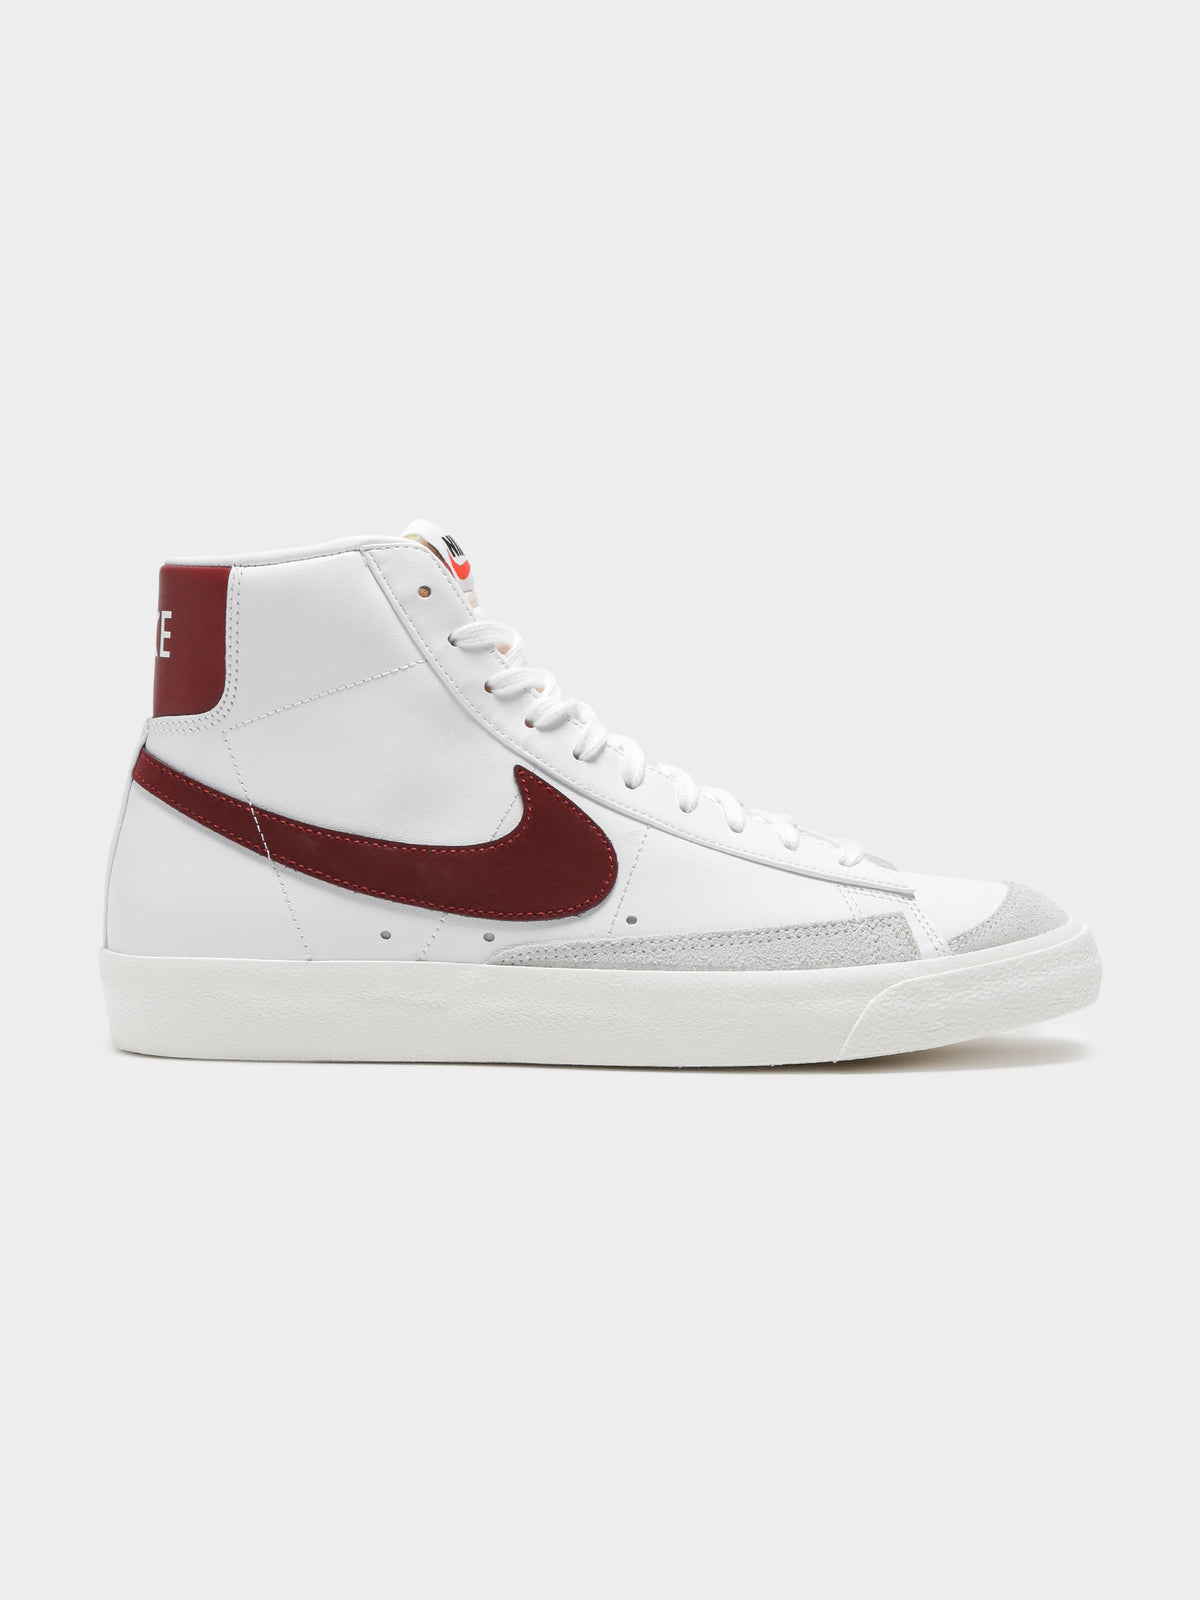 Mens Blazer Mid 77 Sneakers in White &amp; Red